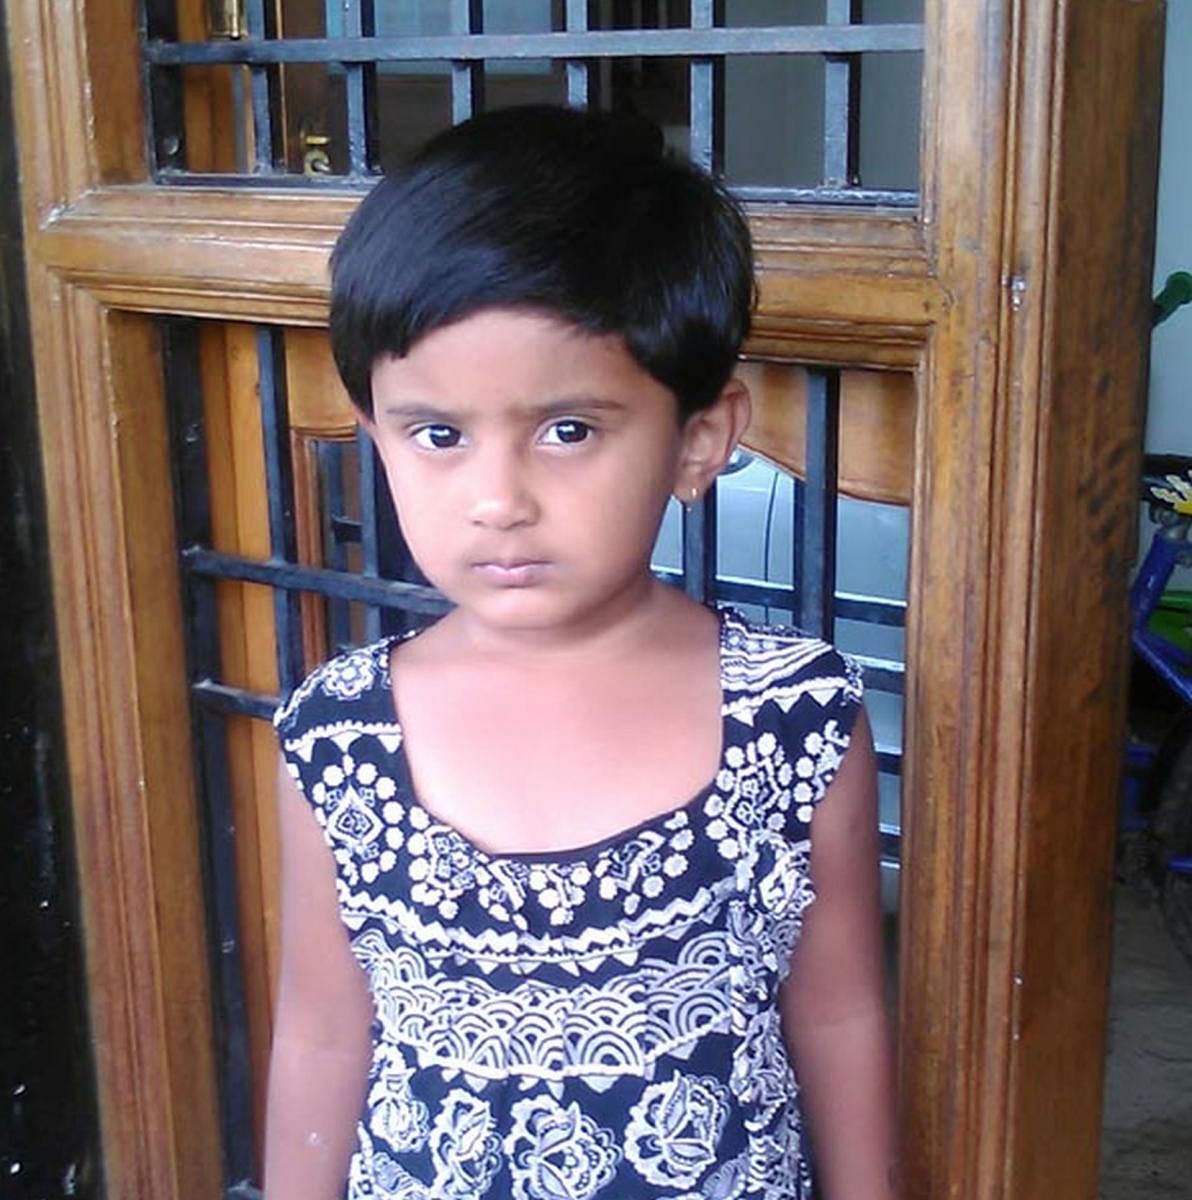 Chandana, who saved her friend from drowning.